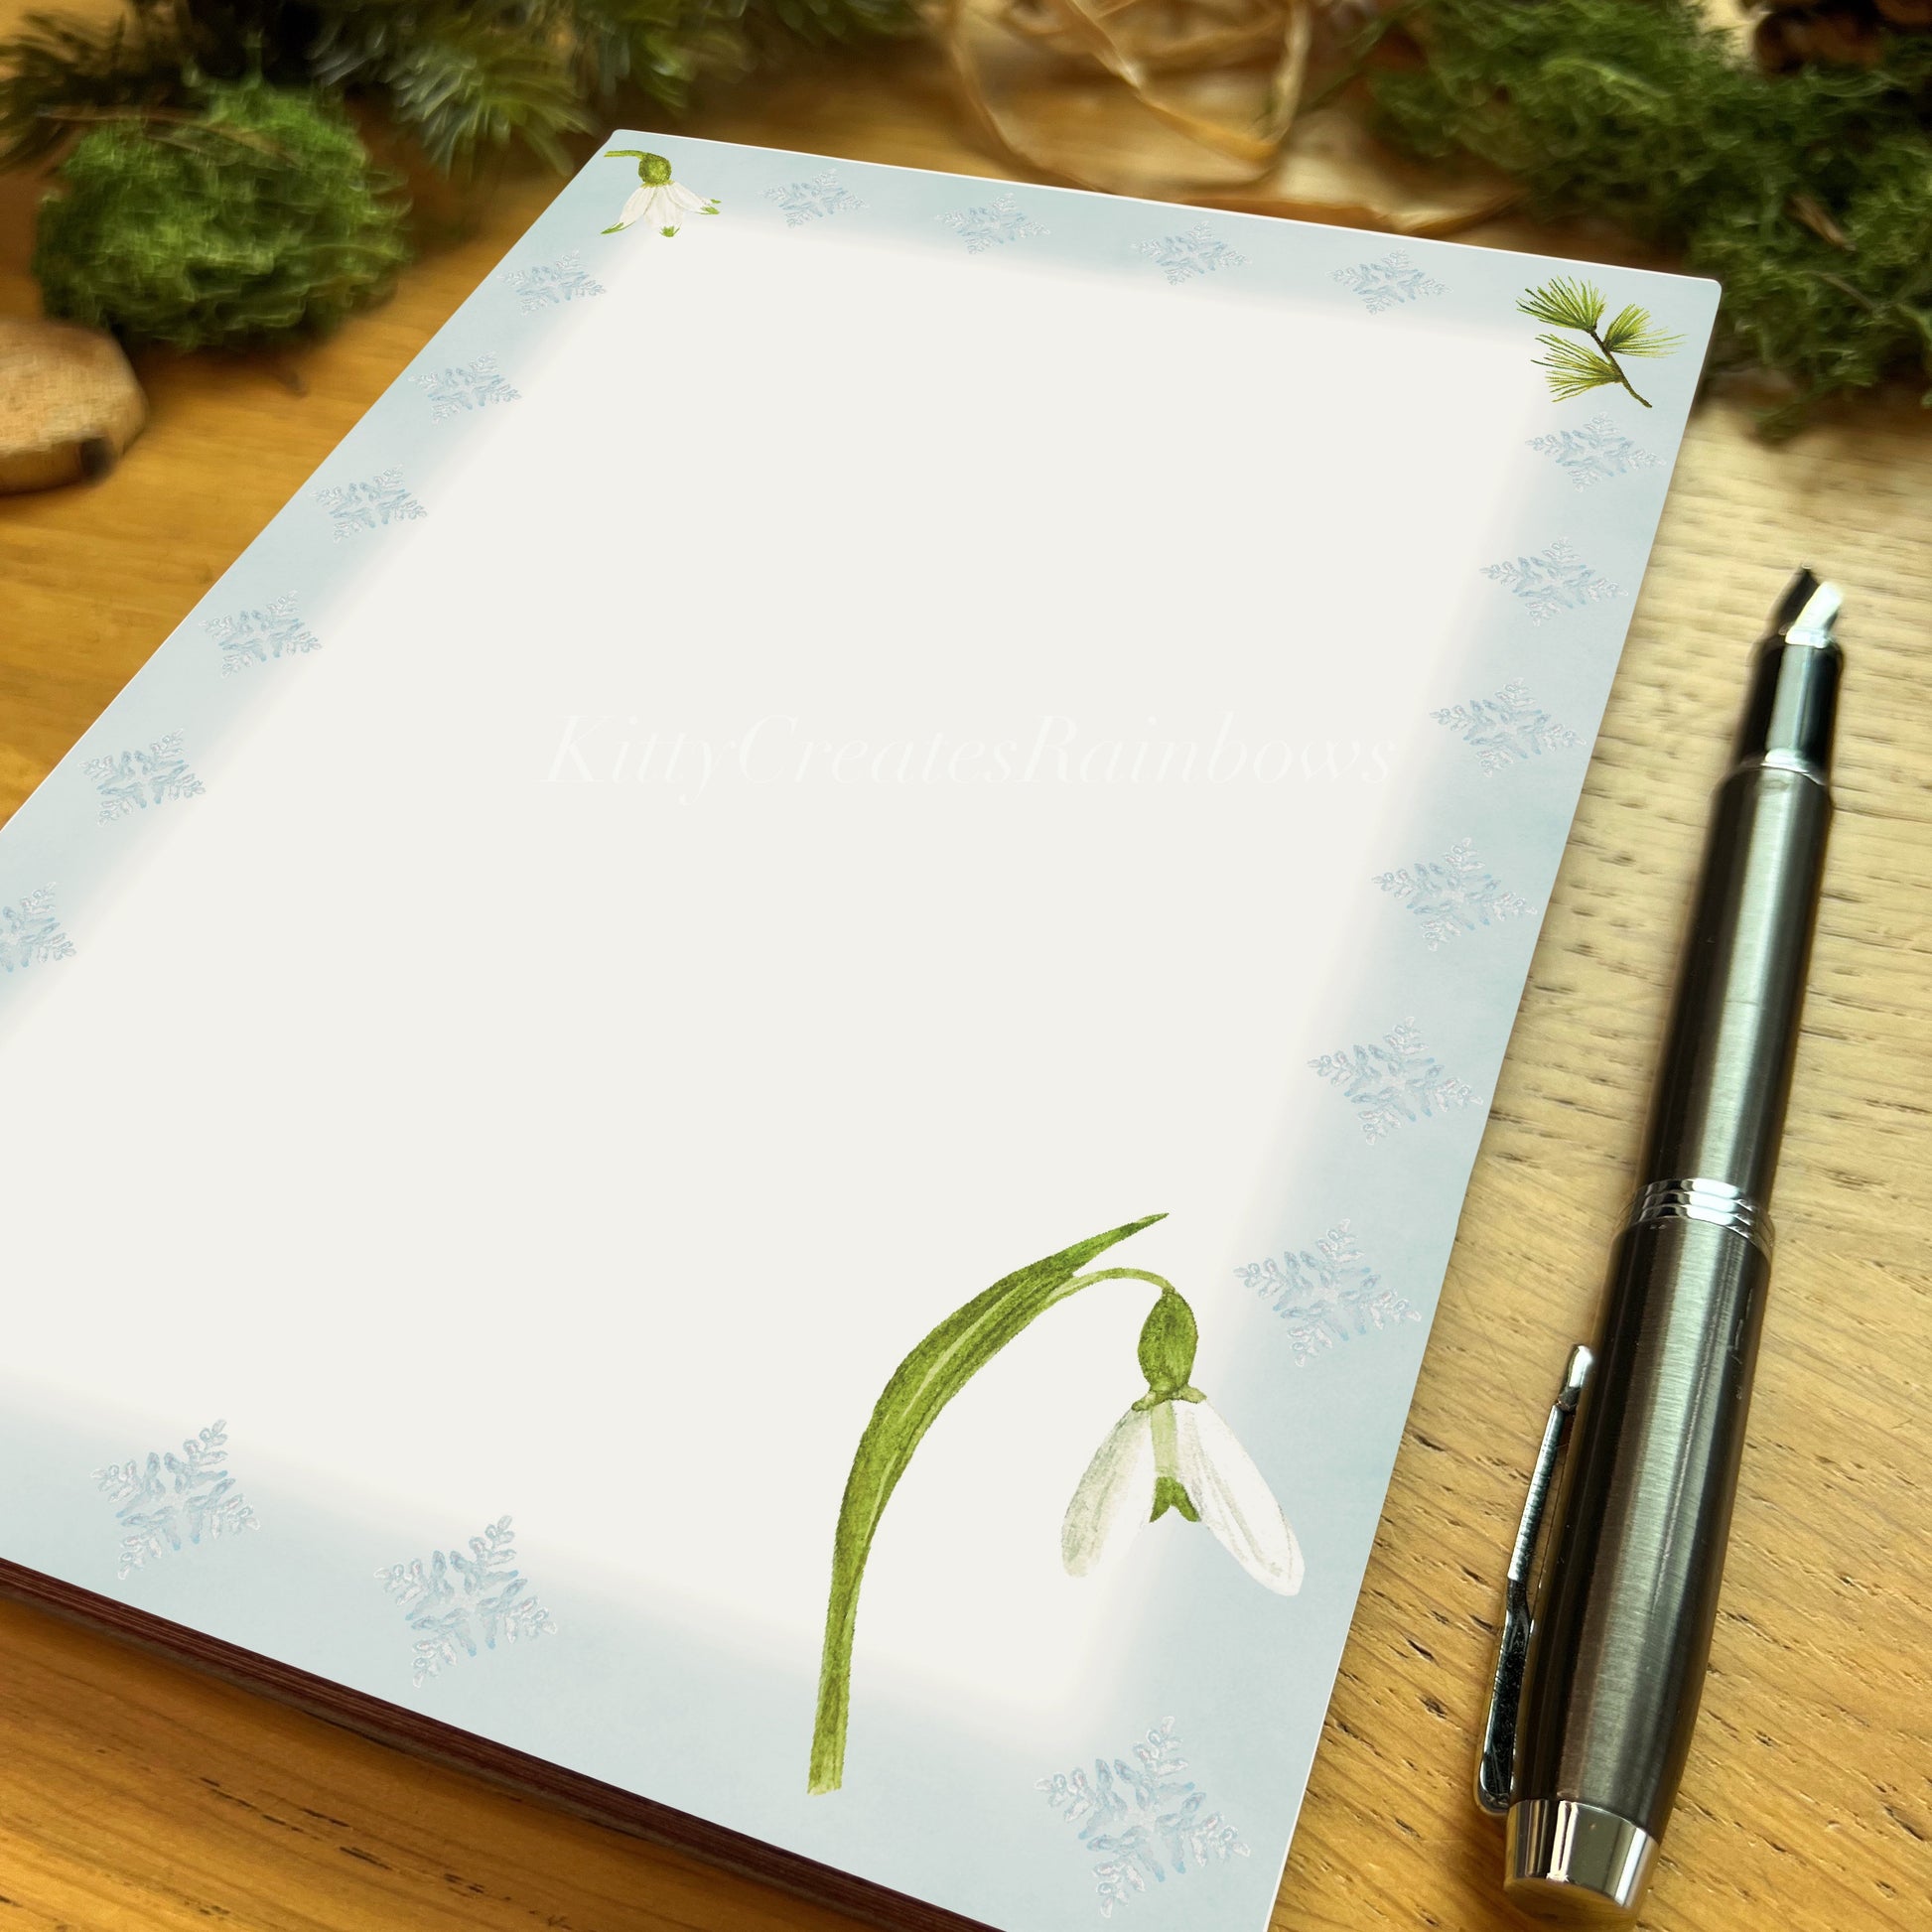 Snowdrop illustrated notepad page with icy blue border on a wooden desk with a fountain pen